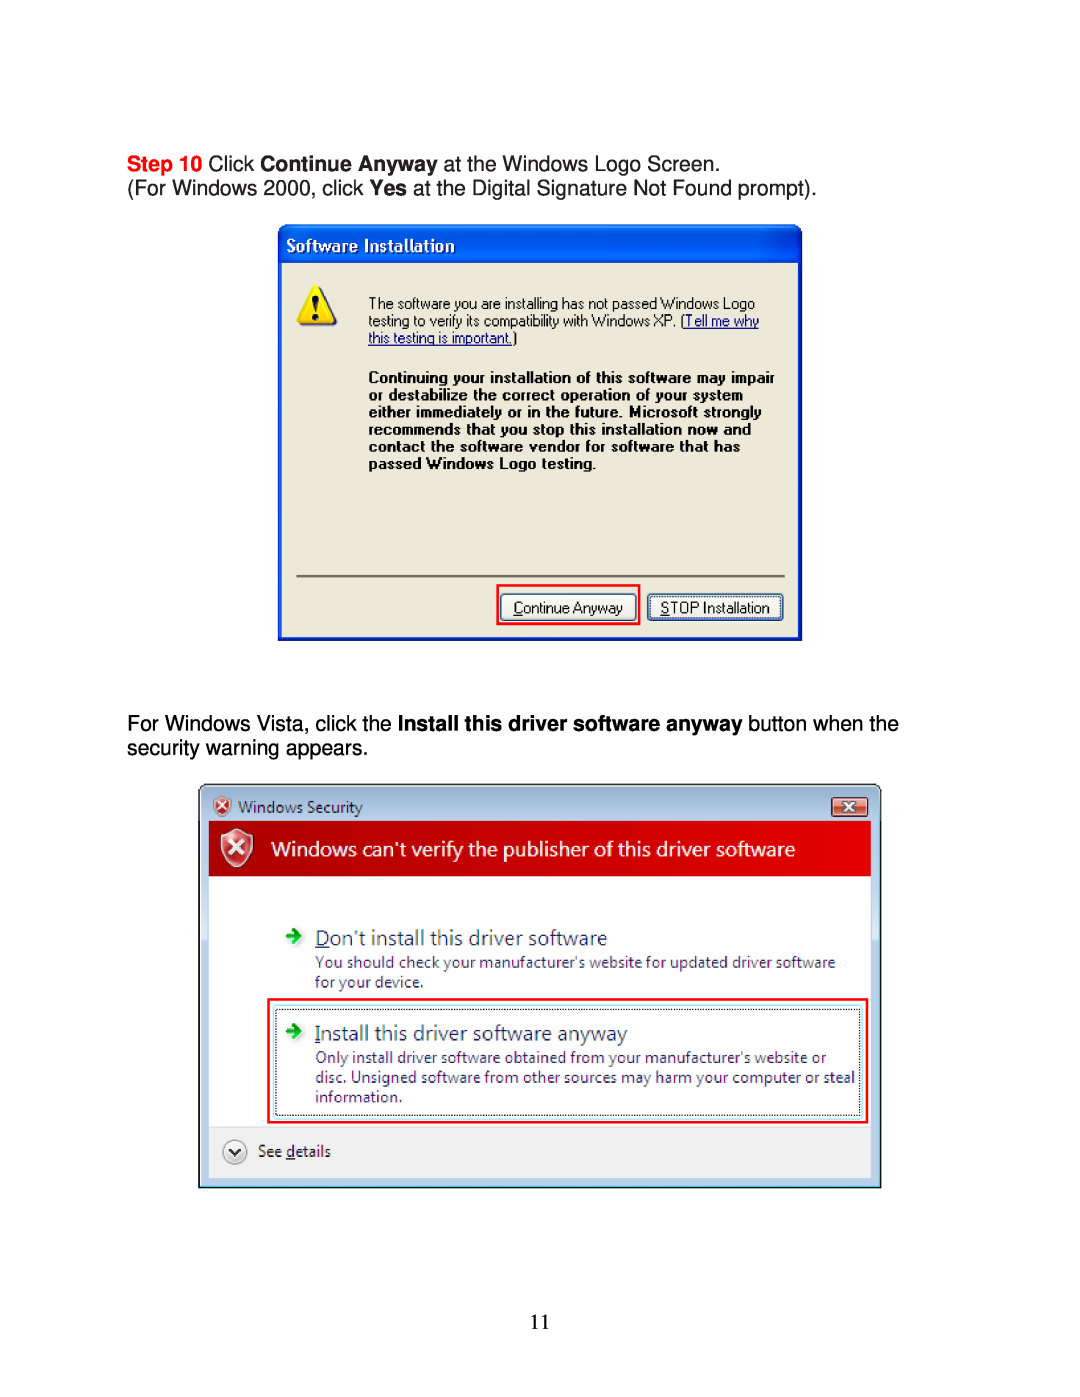 Airlink101 AWLH6070 user manual Click Continue Anyway at the Windows Logo Screen 